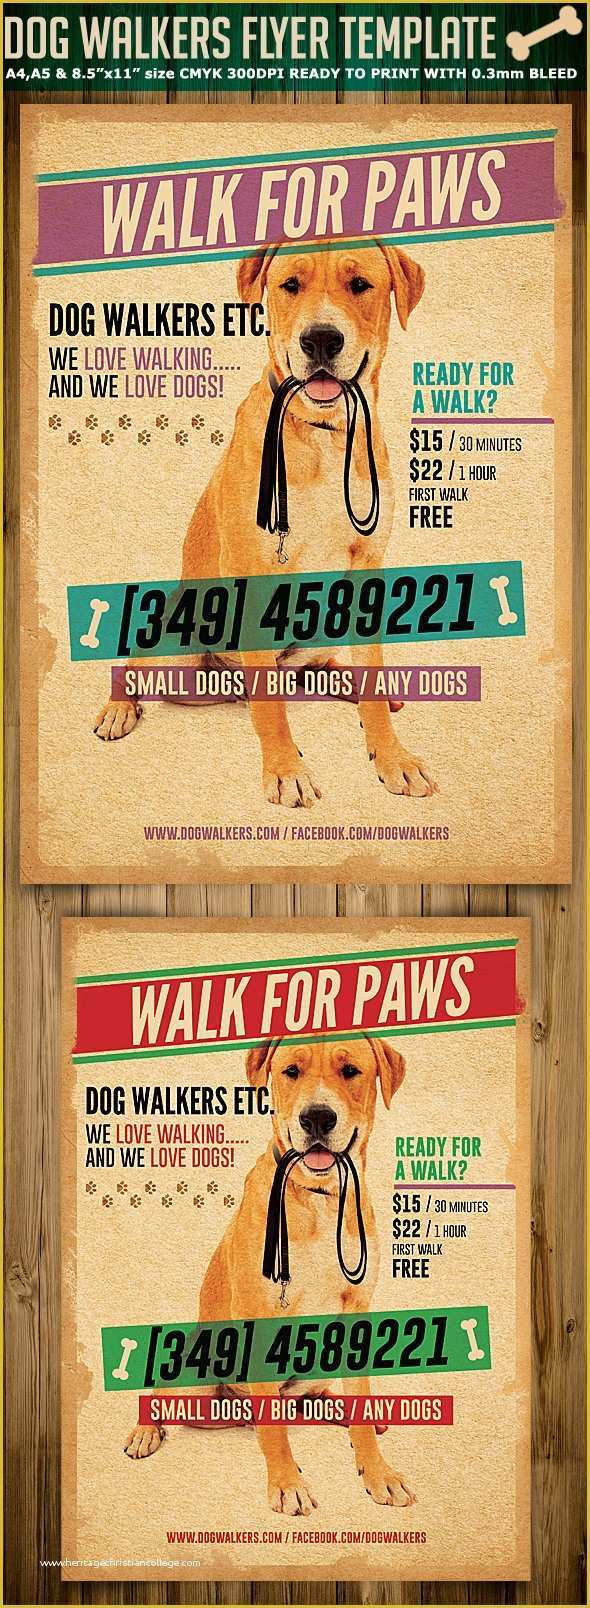 Dog Walking Flyer Template Free Of Dog Walkers Flyer Template 2 On Behance